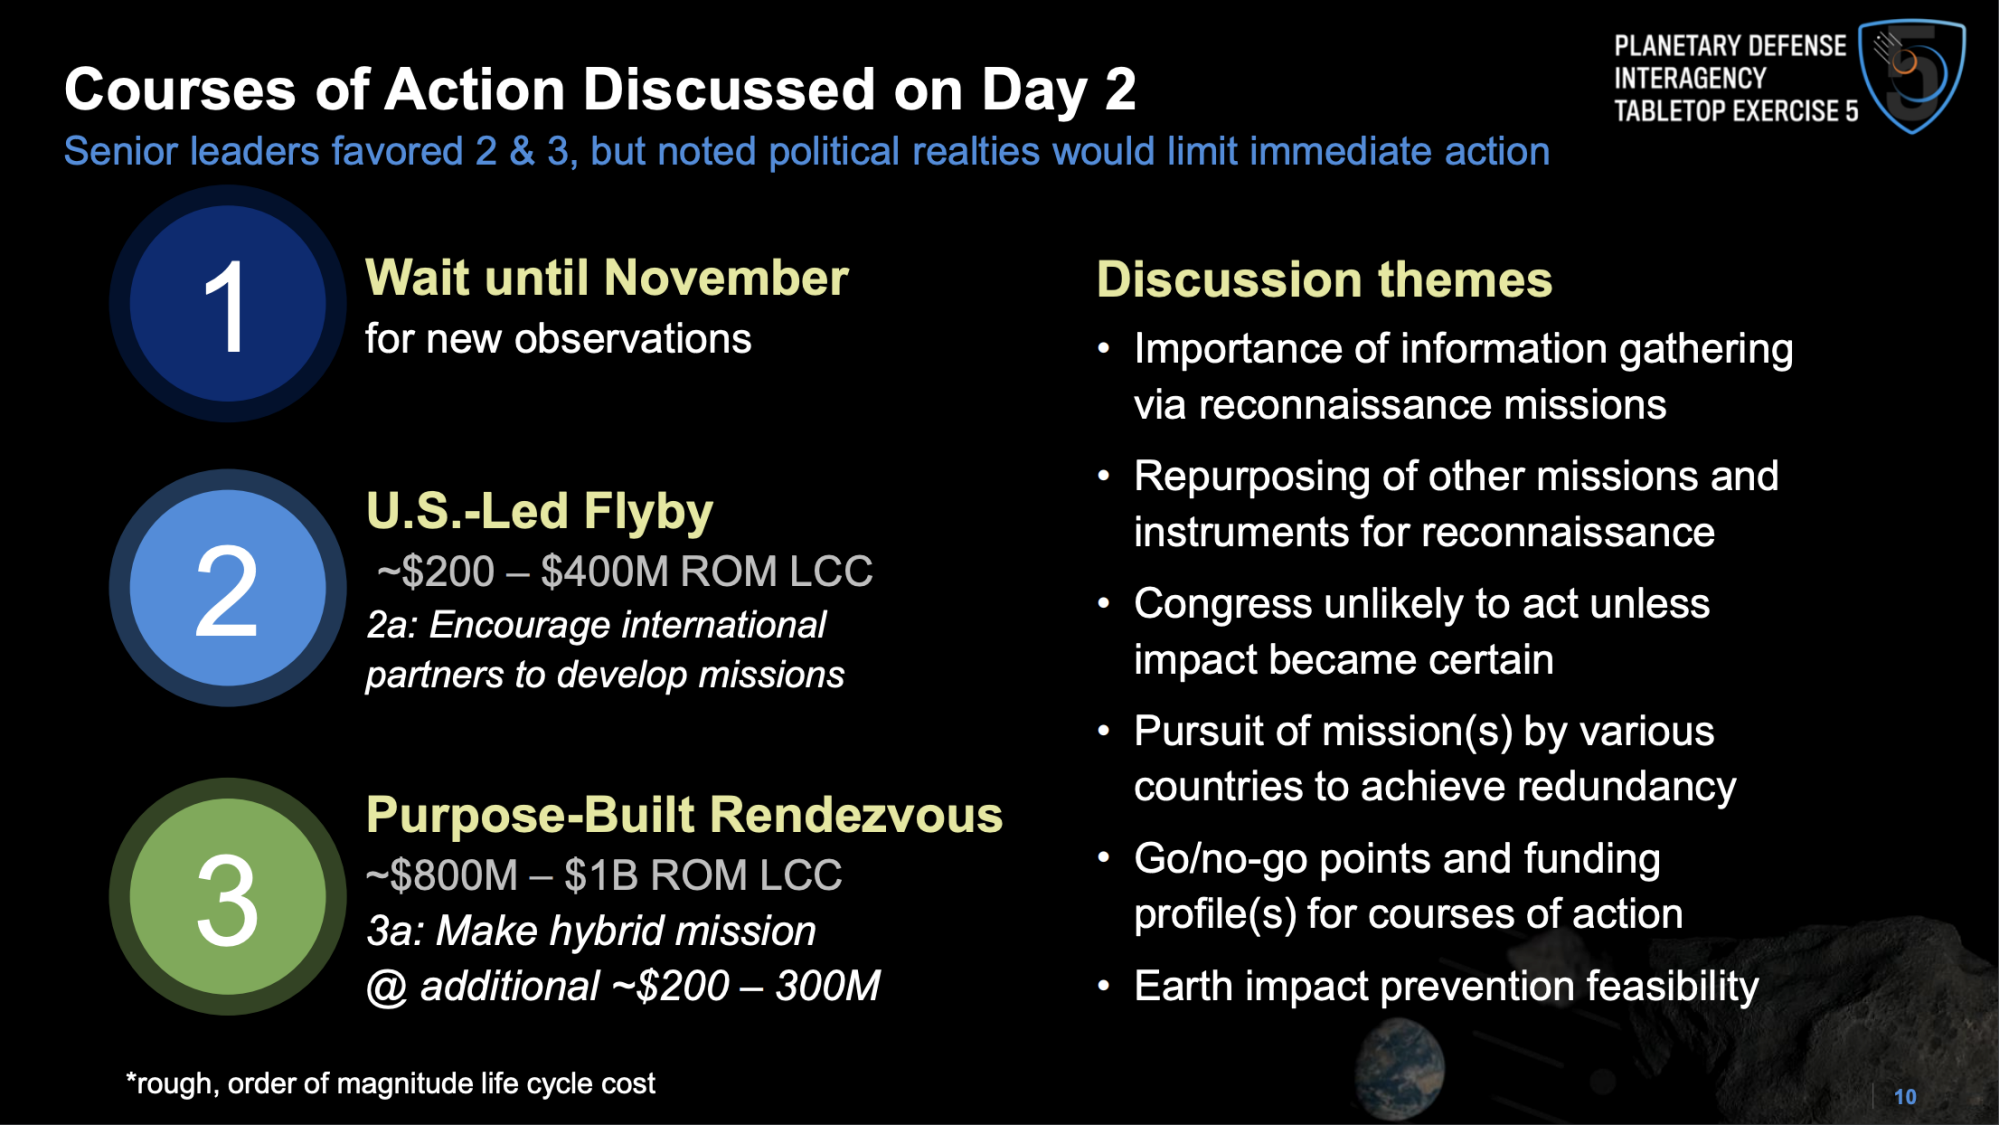 A slide from the Planetary Defense Interagency Tabletop Exercise showing courses of action for contending with a likely impact.